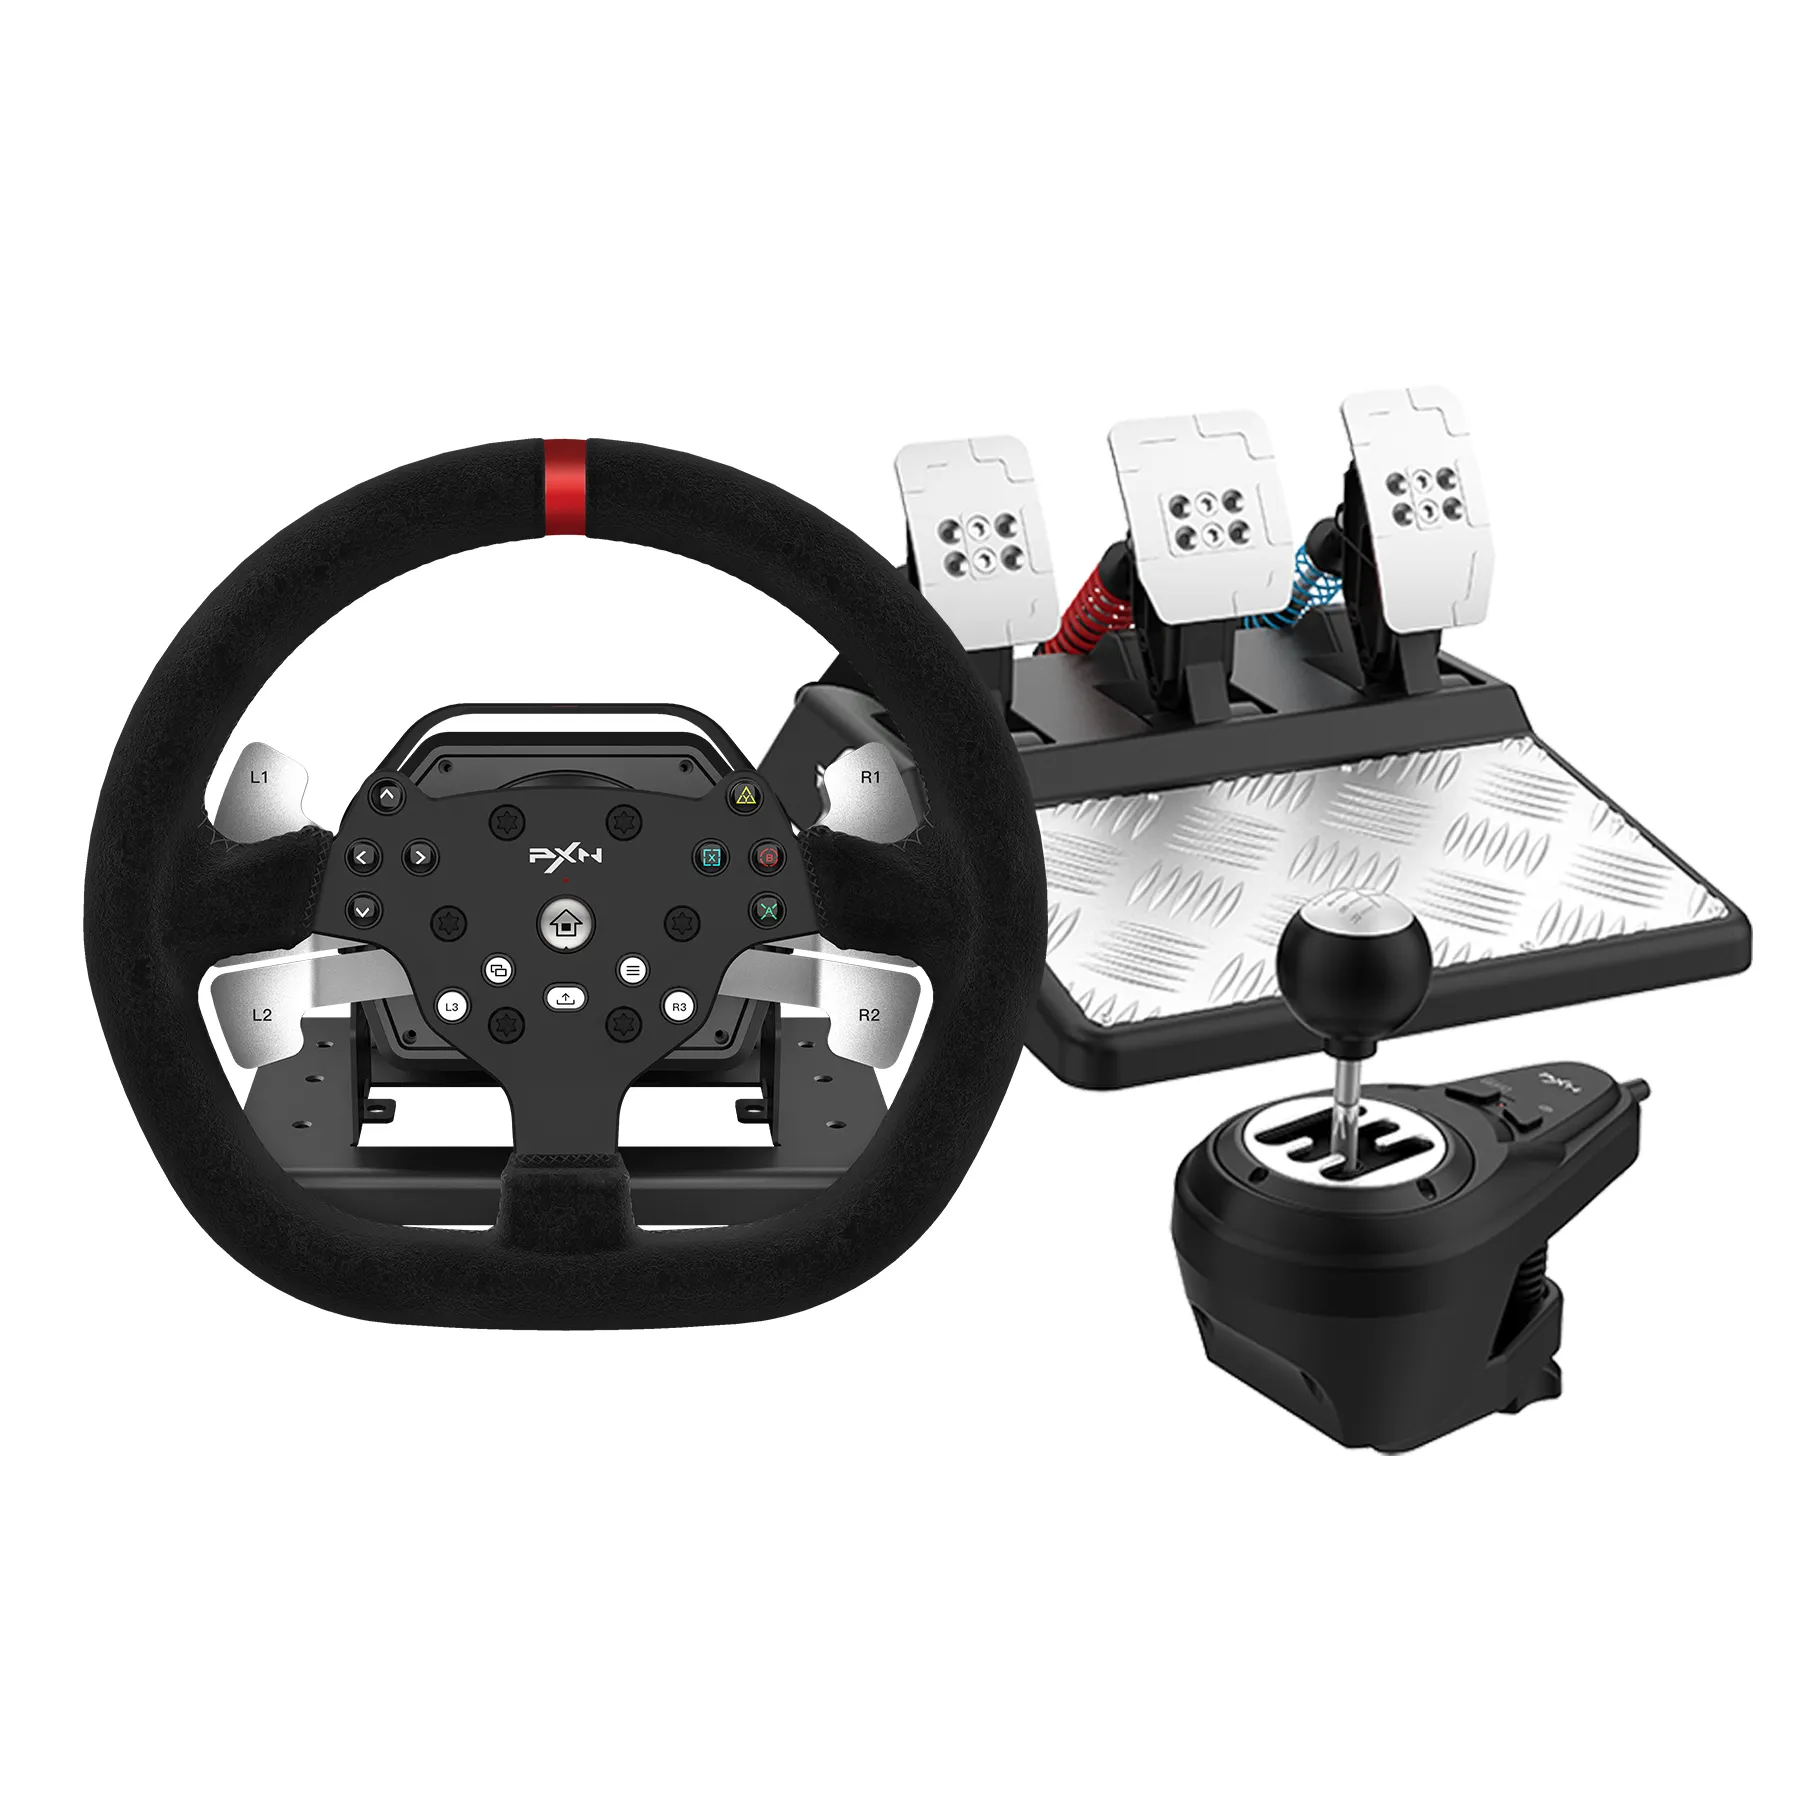 PXN V10 driving force f1 forza gaming racing wheel for ps4 for xbox for pc, steering wheel with 3-pedals and shifter